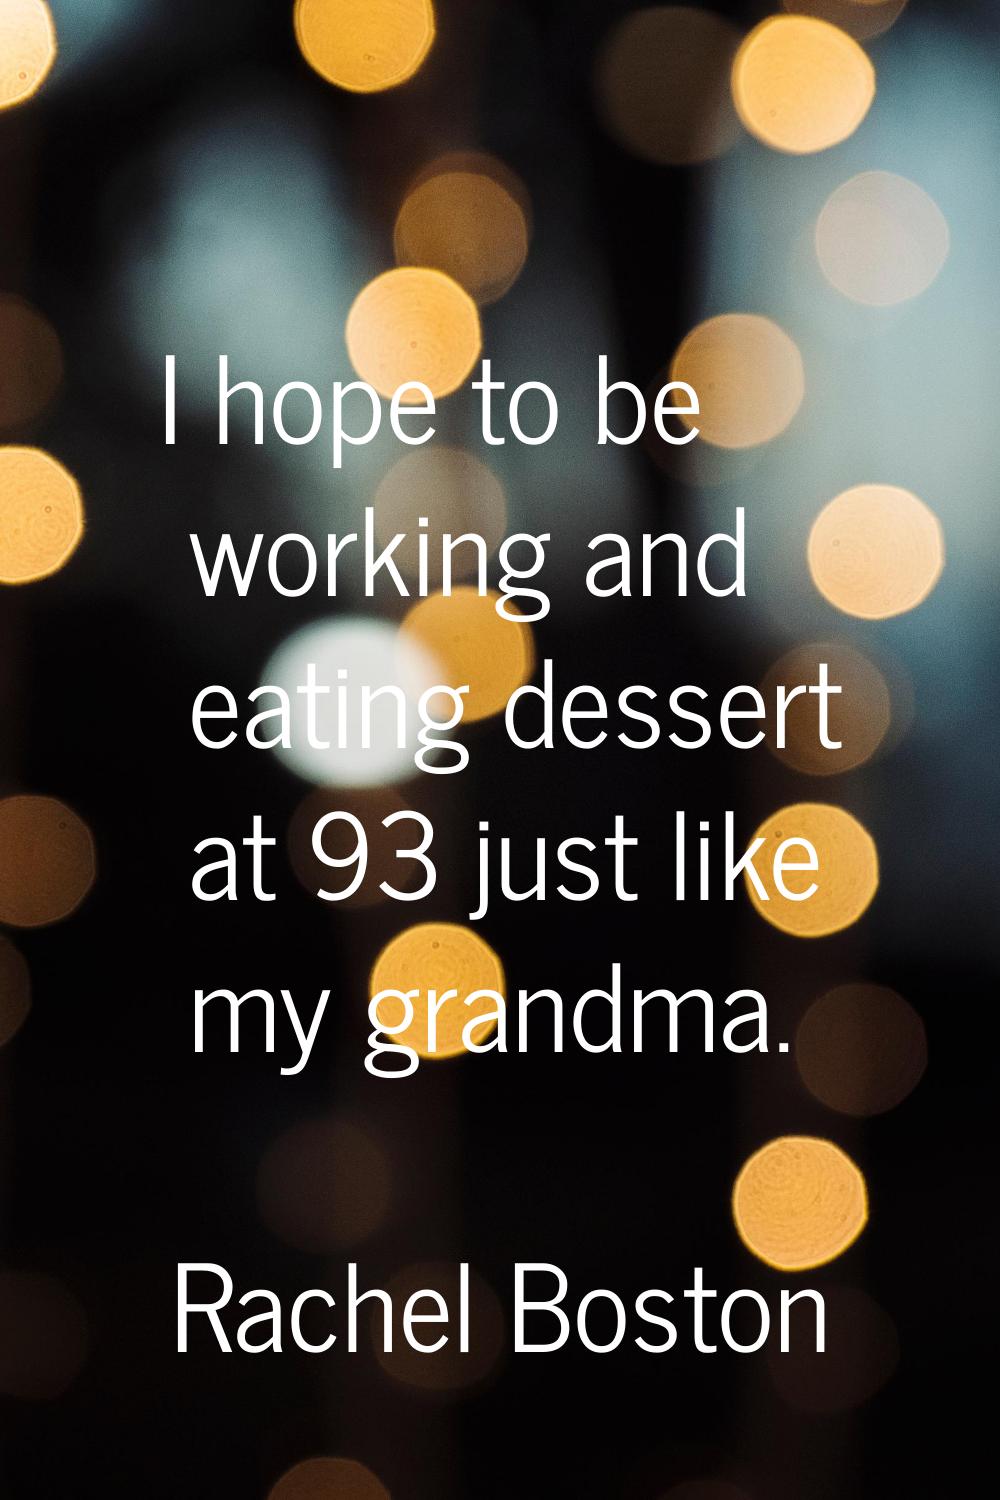 I hope to be working and eating dessert at 93 just like my grandma.